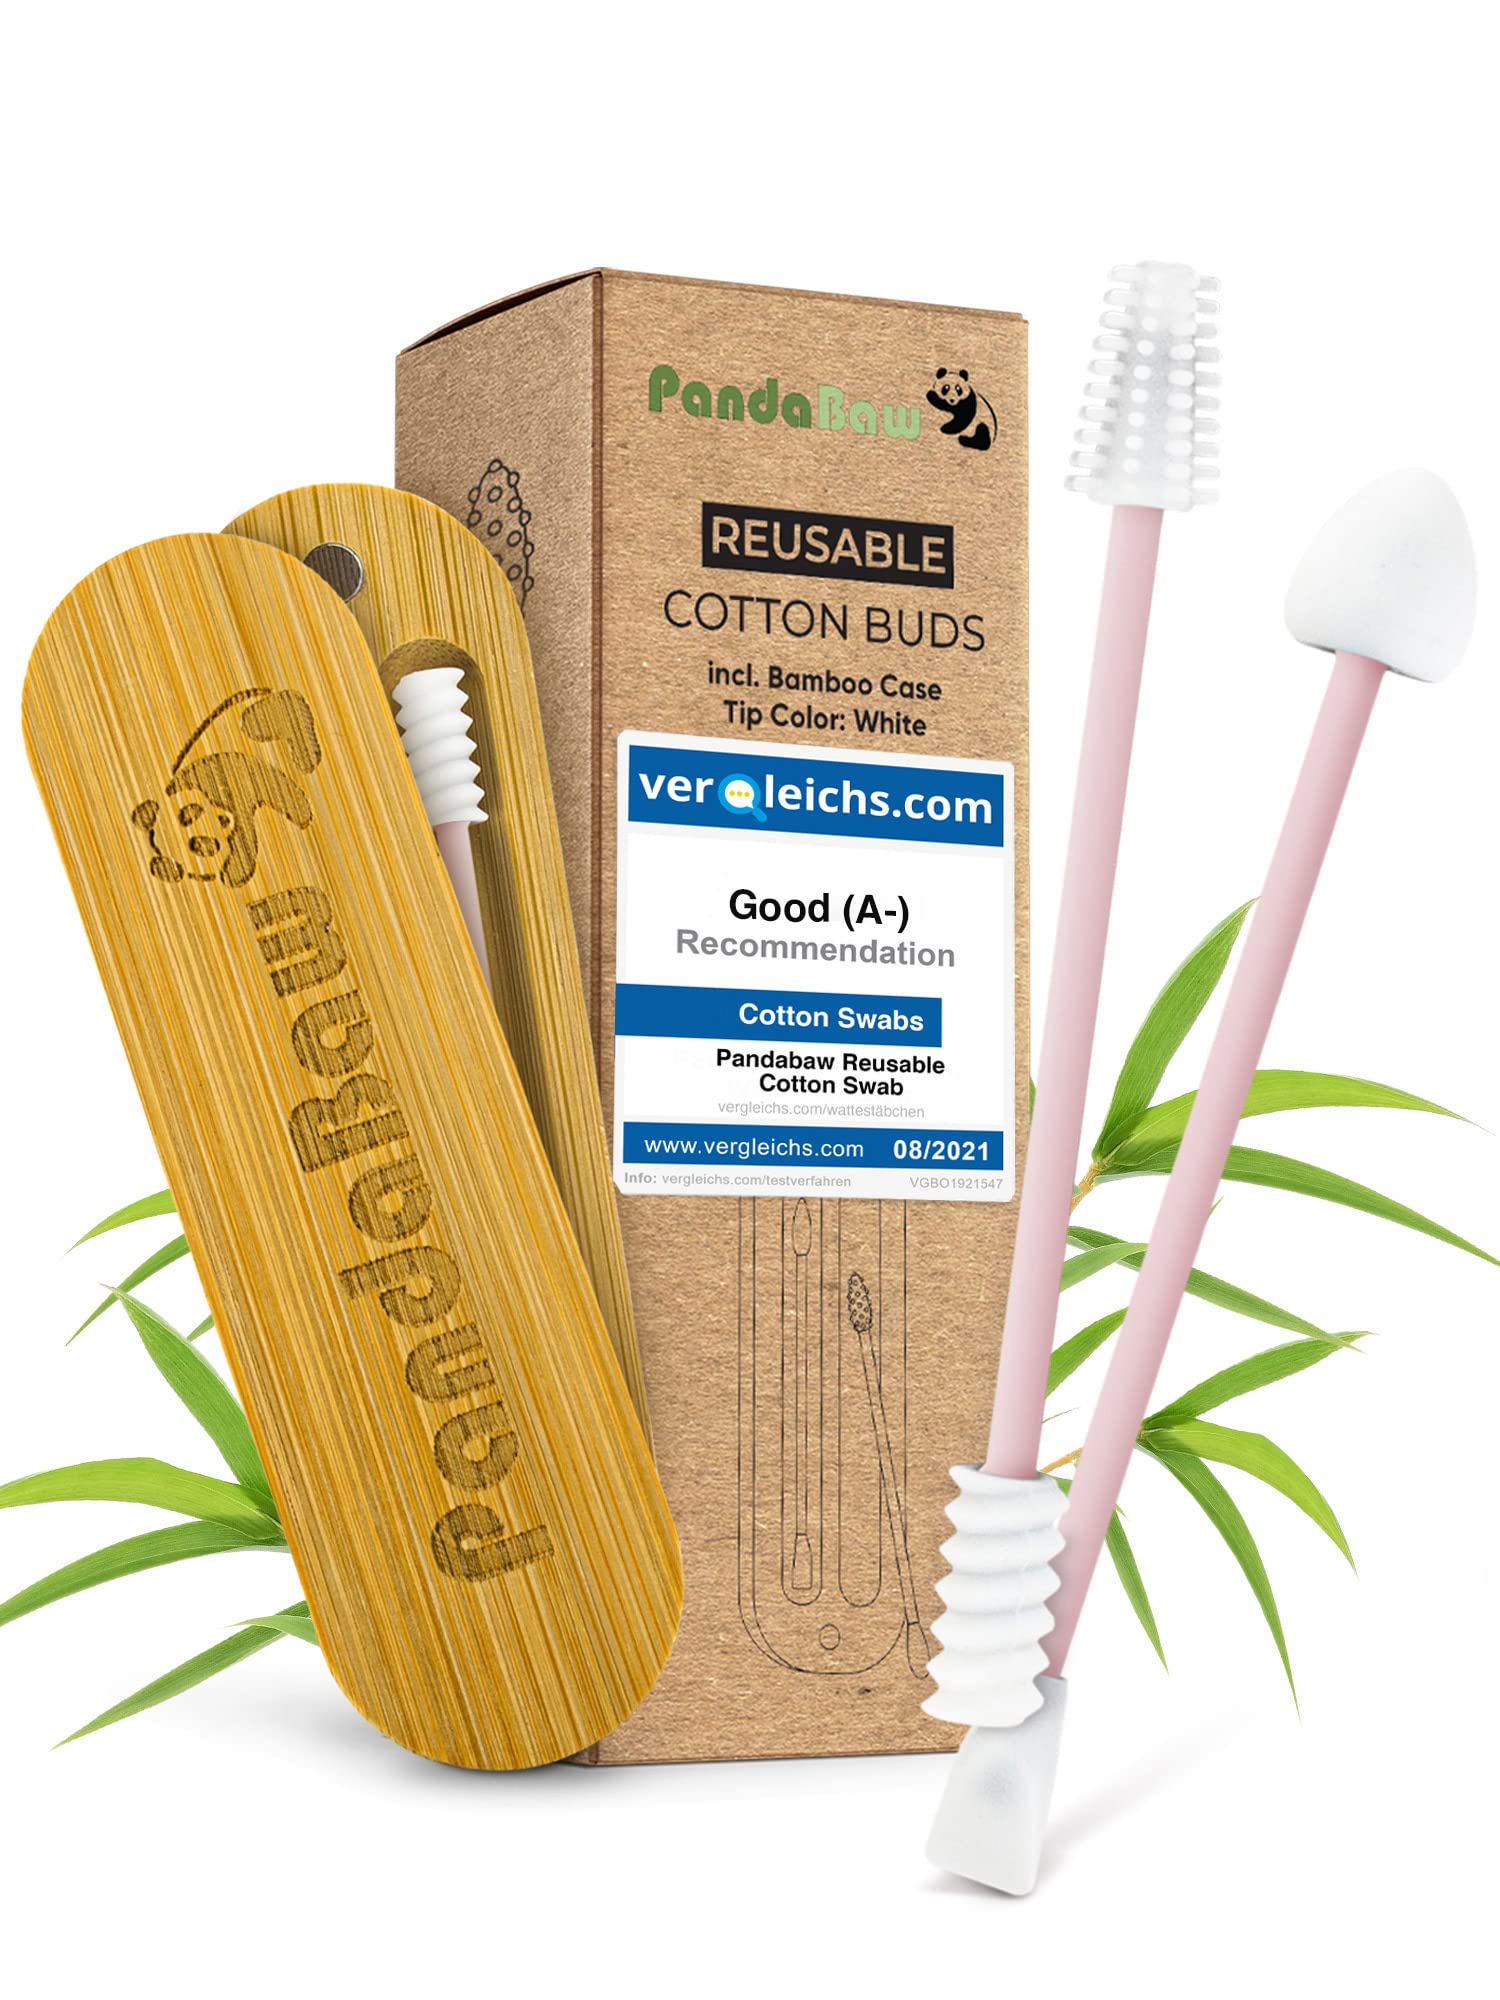 New: PandaBaw 2 x Reusable Cotton Swabs Extra Soft - Silicone Qtip